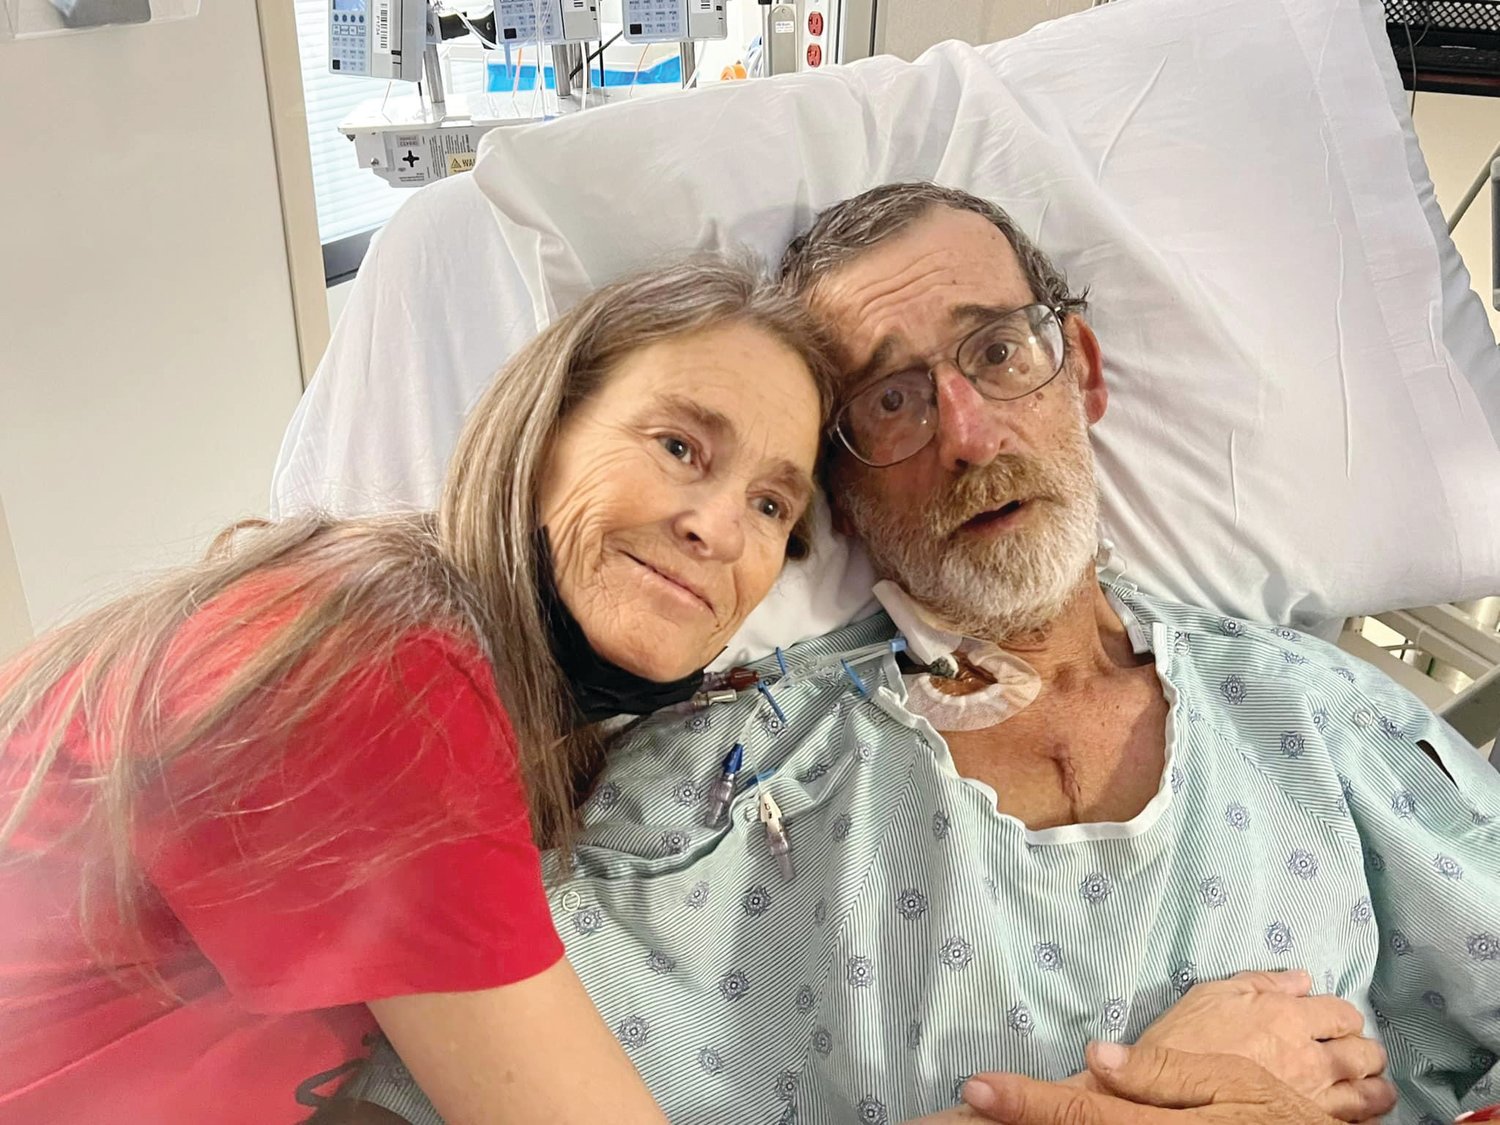 Pat and Wayne Seibers are thankful that both survived heart attacks within only a few days of each other.